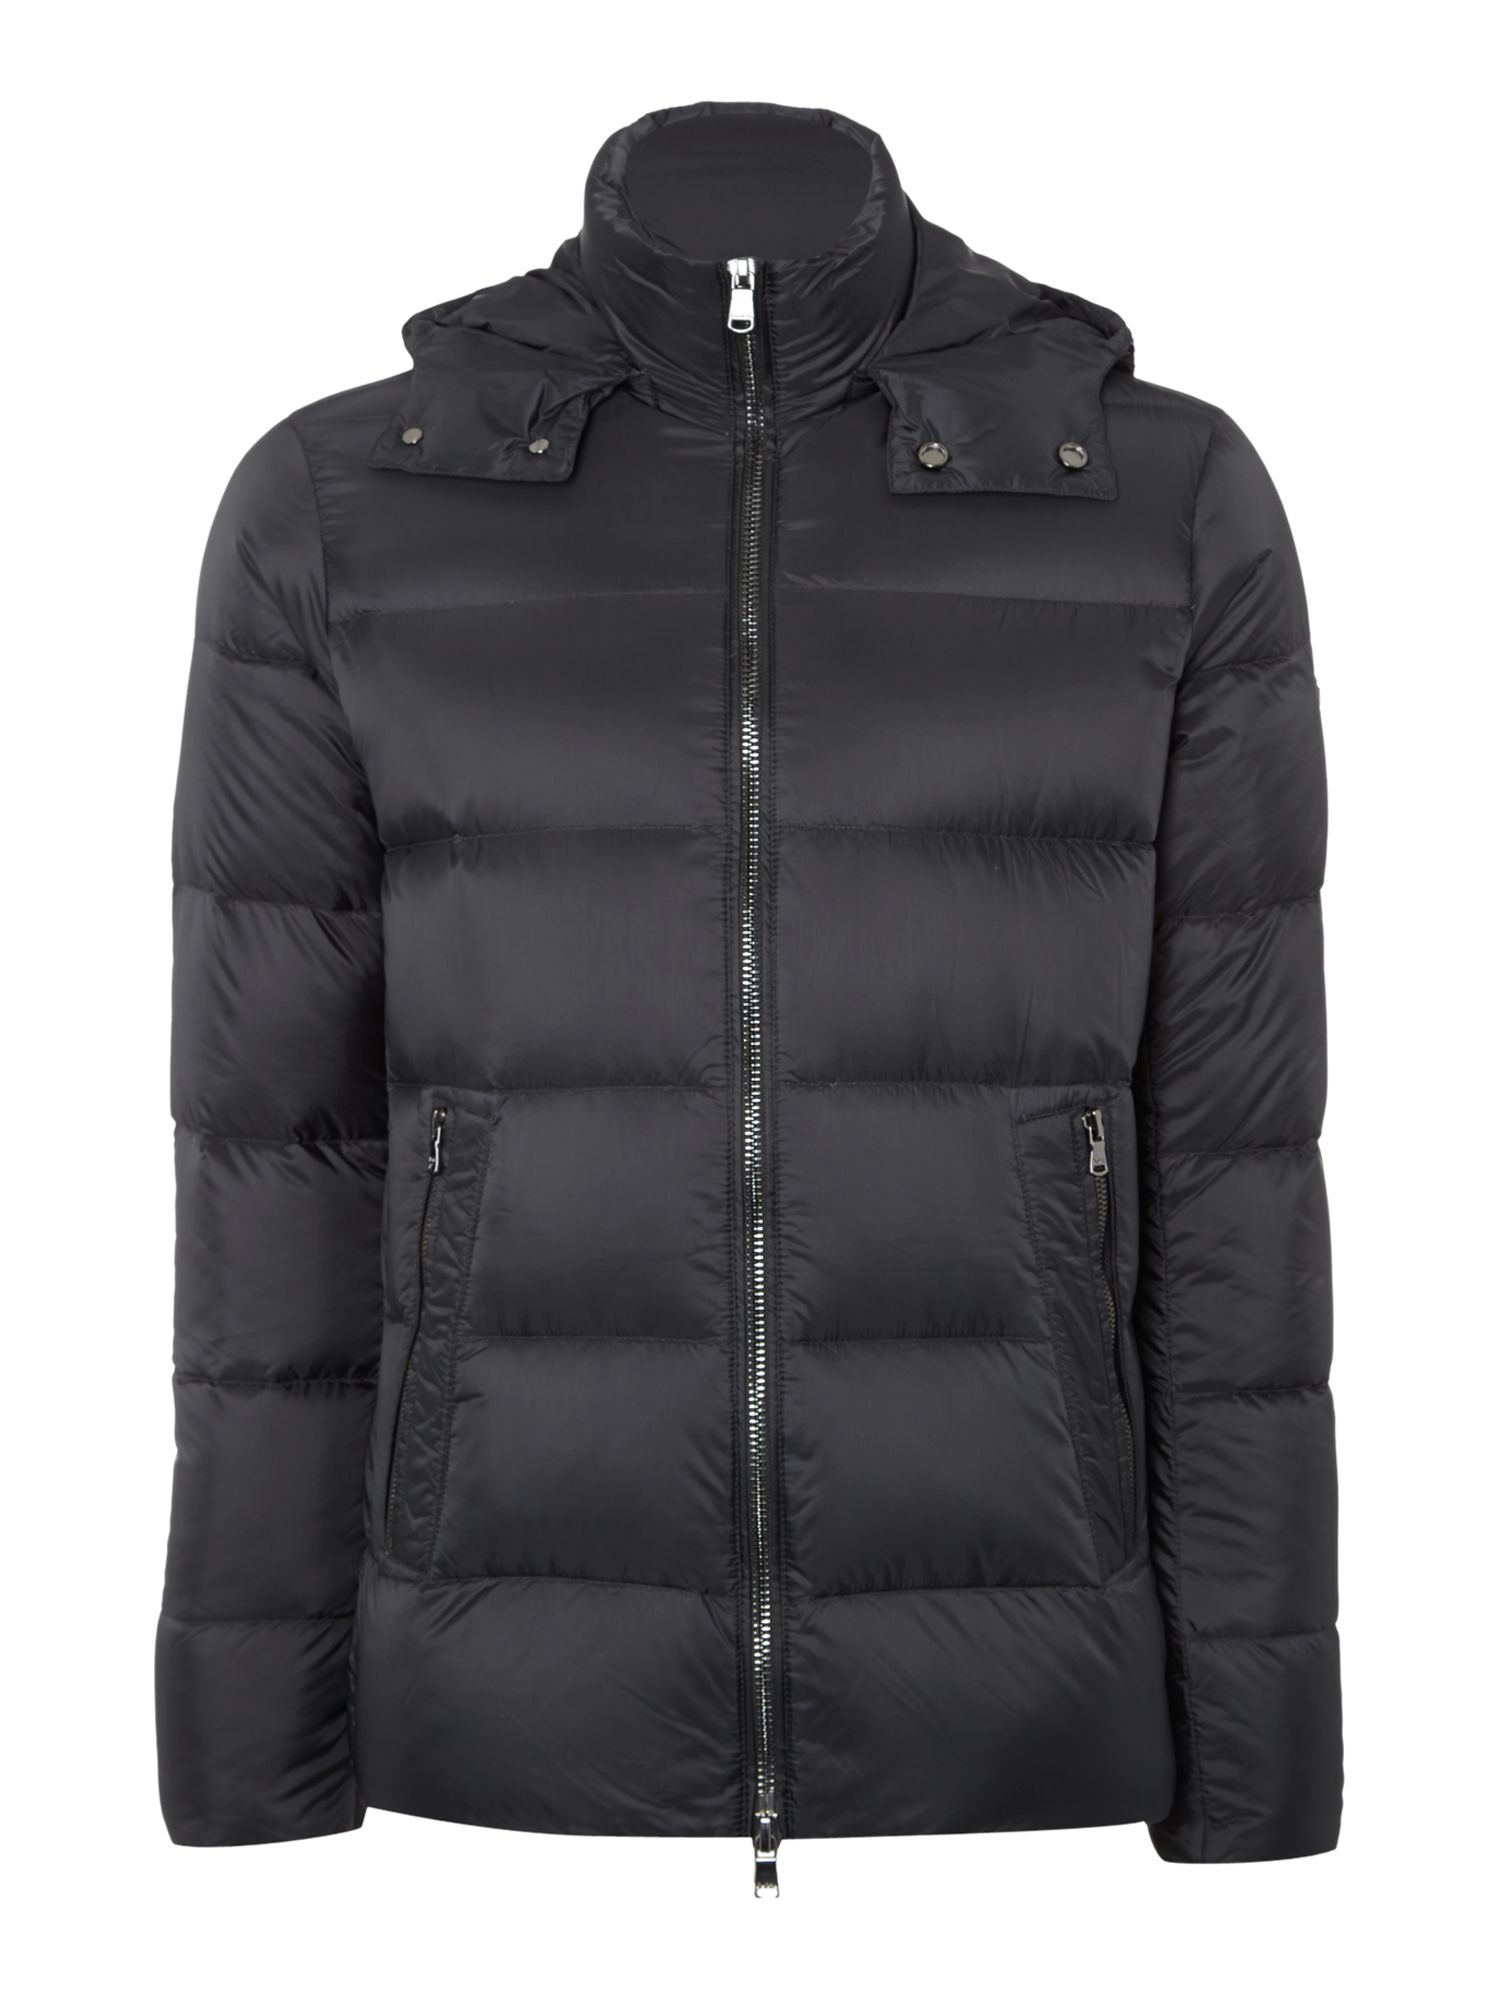 Michael Kors Synthetic Hooded Down Jacket in Black for Men - Lyst